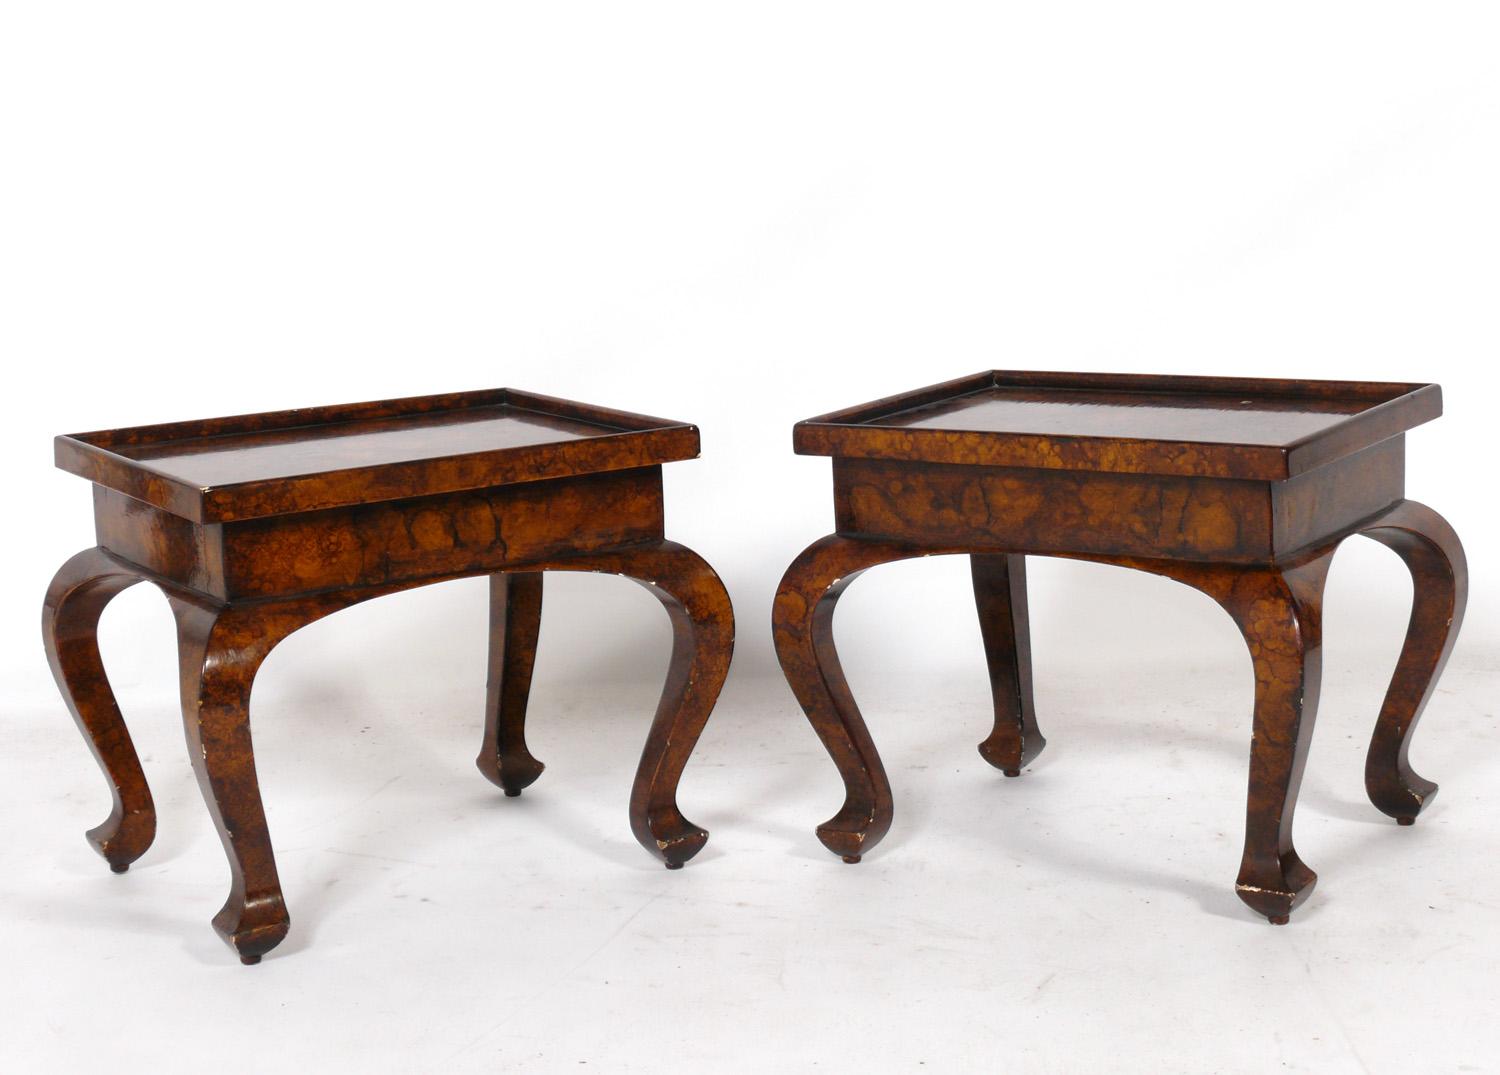 Hollywood Regency Pair of Petite Faux Tortoiseshell End Tables For Sale